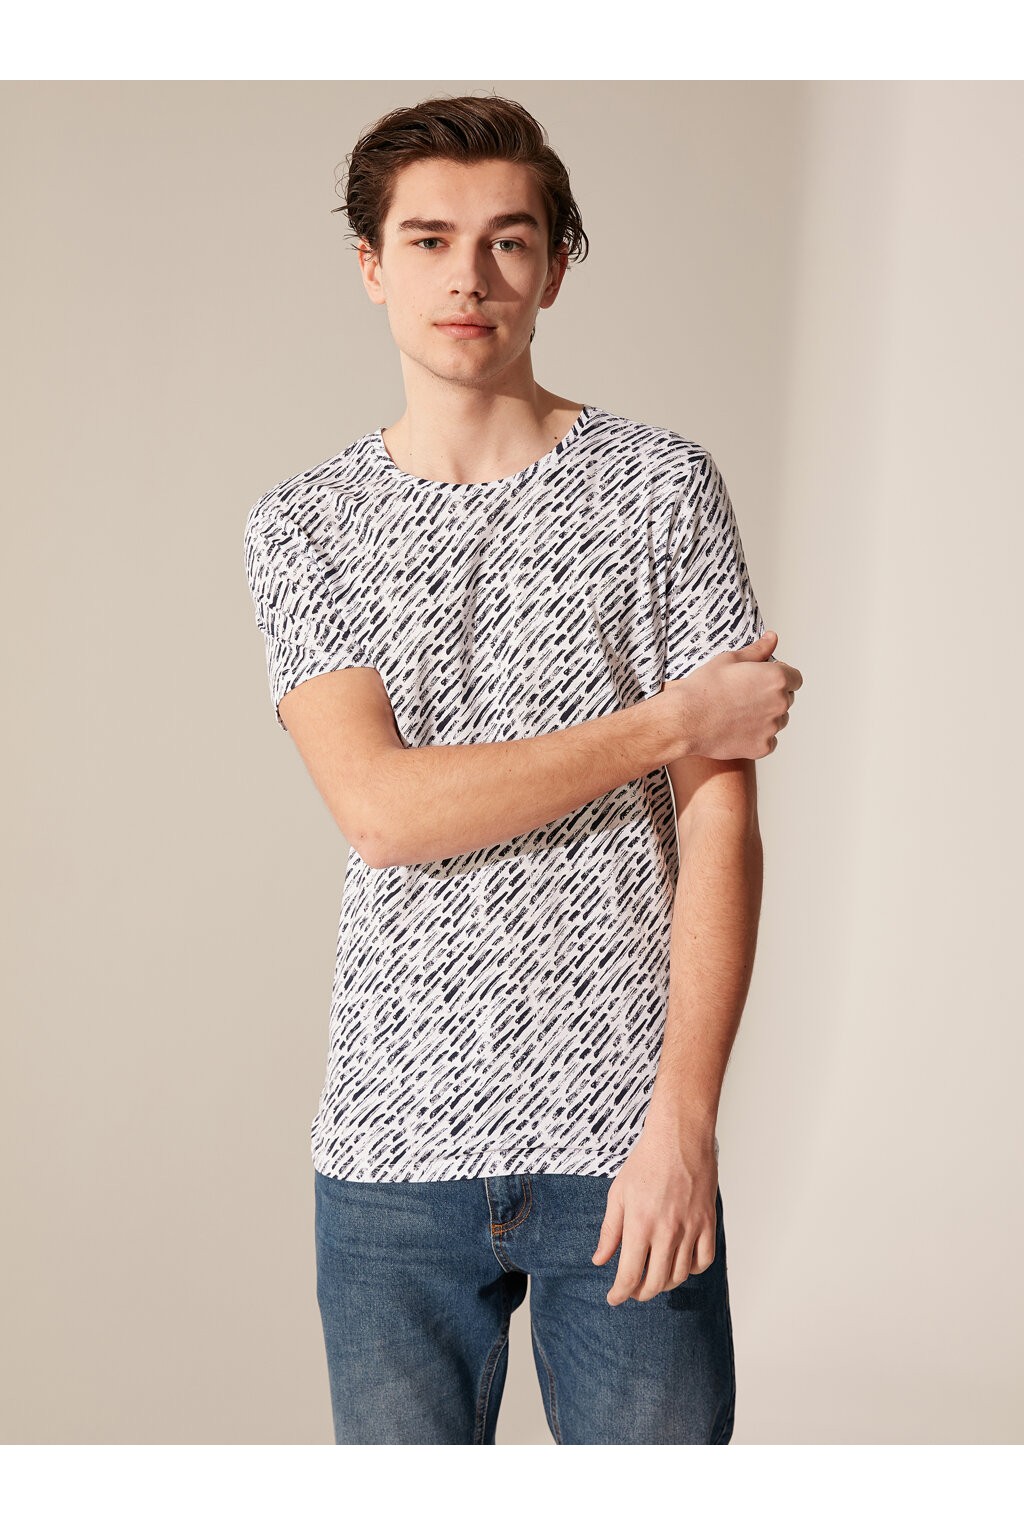 Men's T-shirt with a pattern